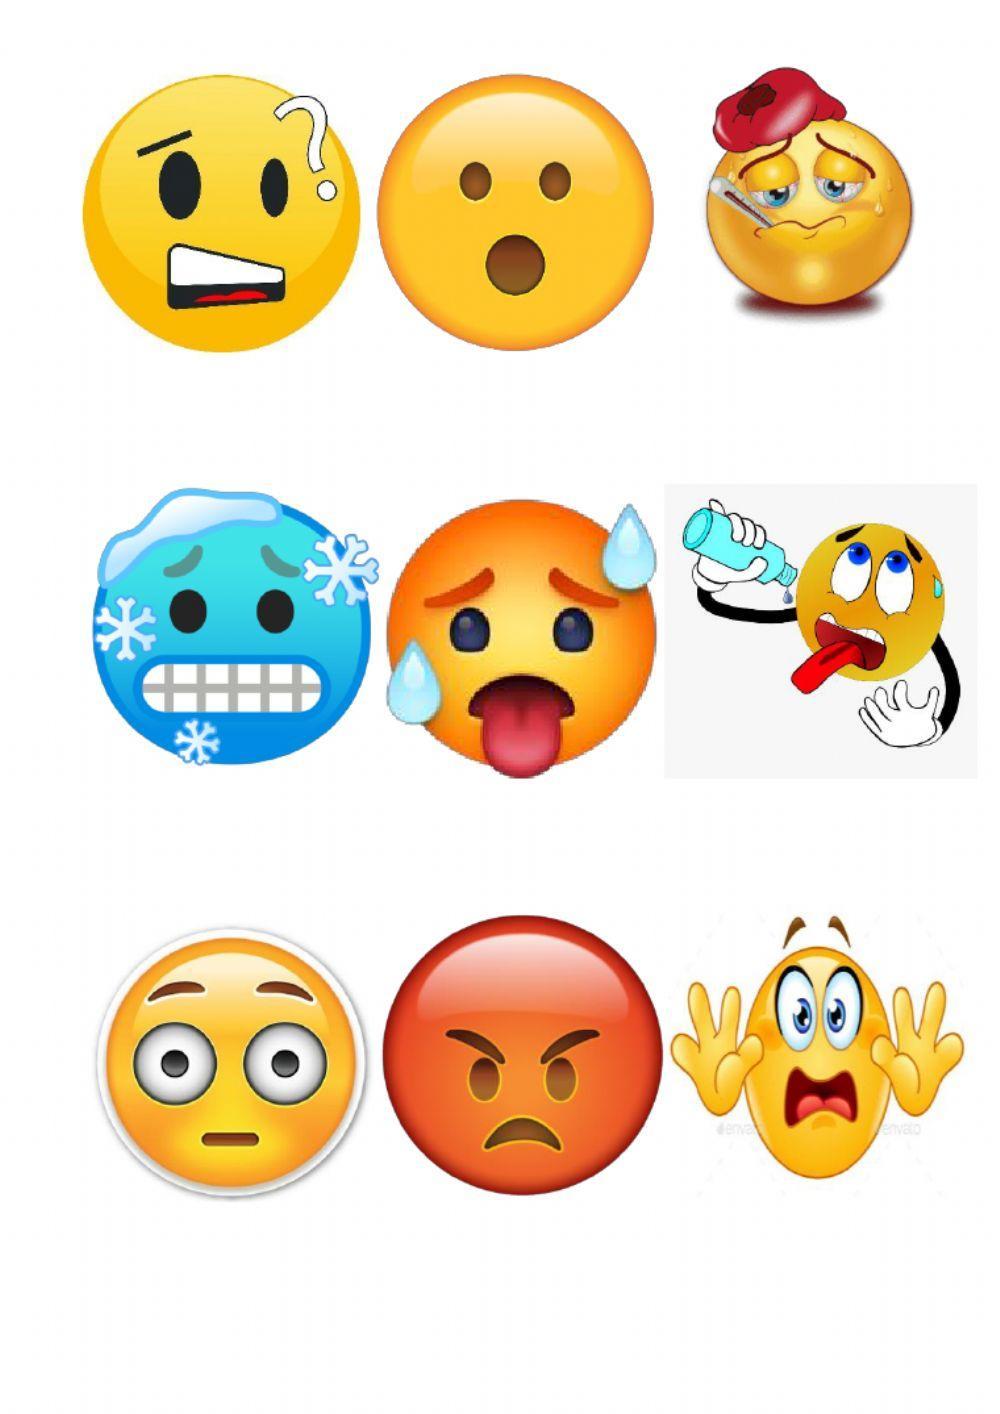 Adjectives to describe feelings and emotions with emojis